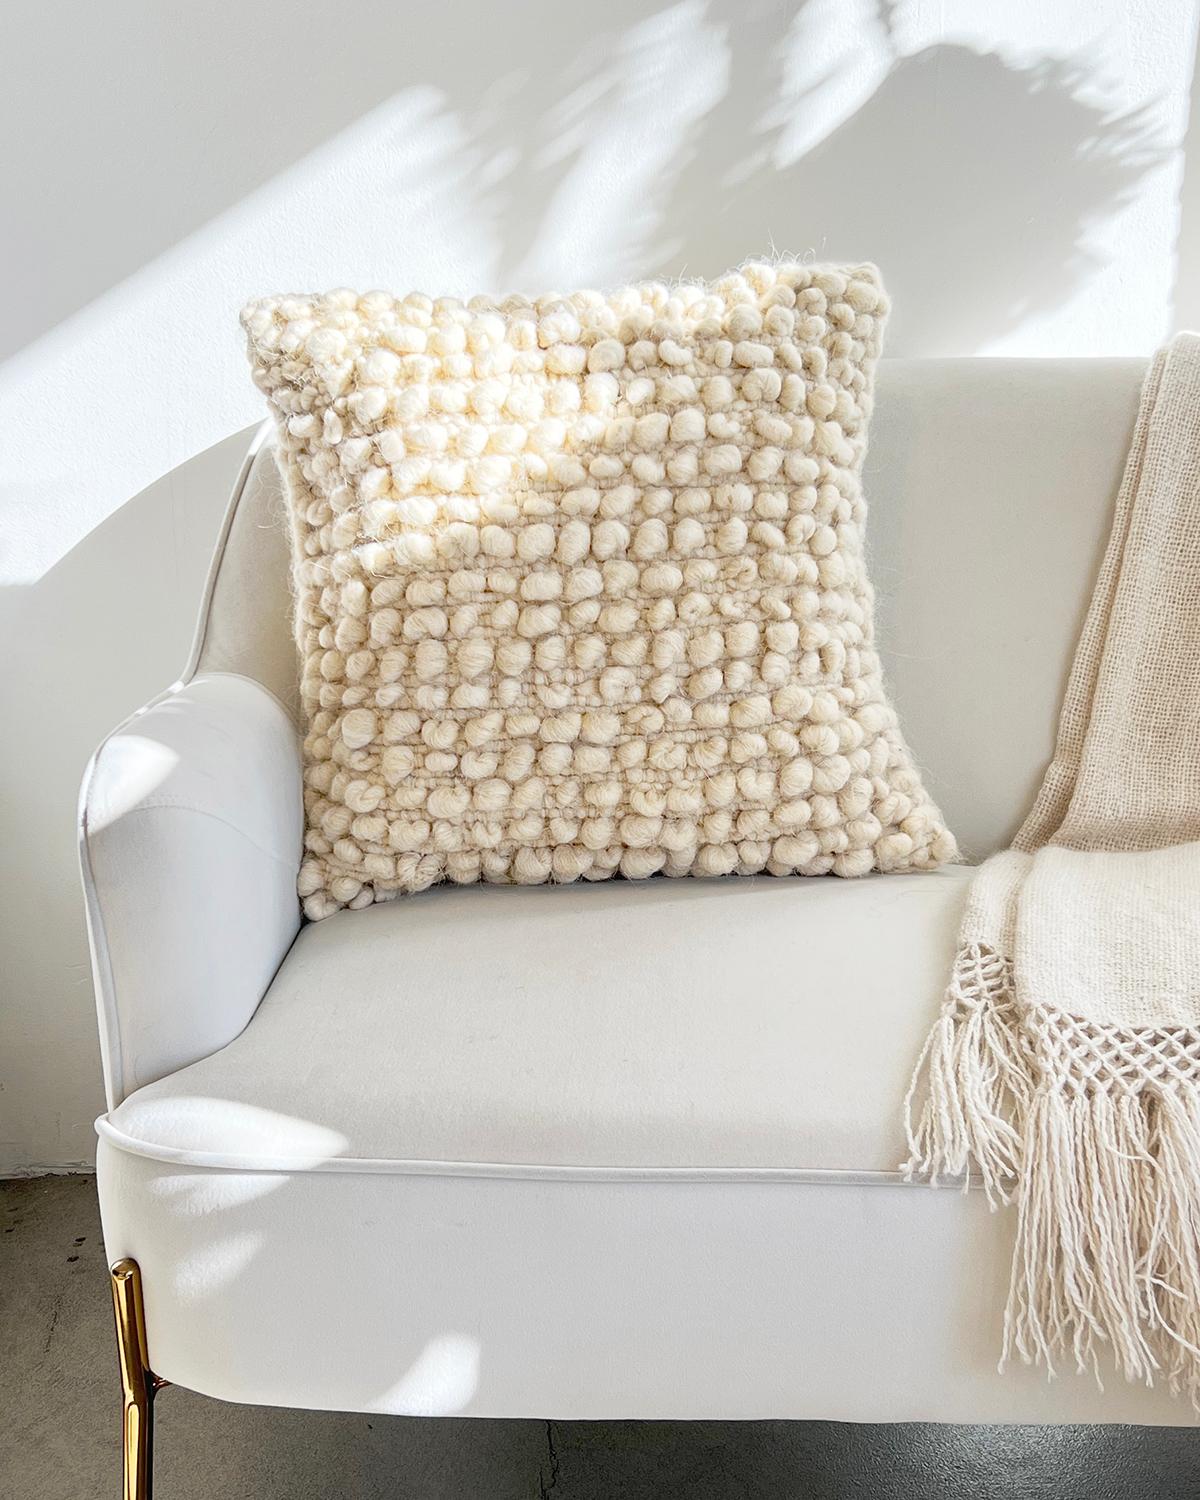 A textured throw pillow for your living room couch. This unique throw pillow features rows of bobbles (balls) made with 100% undyed sheep wool for a truly textured and cozy look. These cushions are handmade by Fatima in Portugal with wool from local